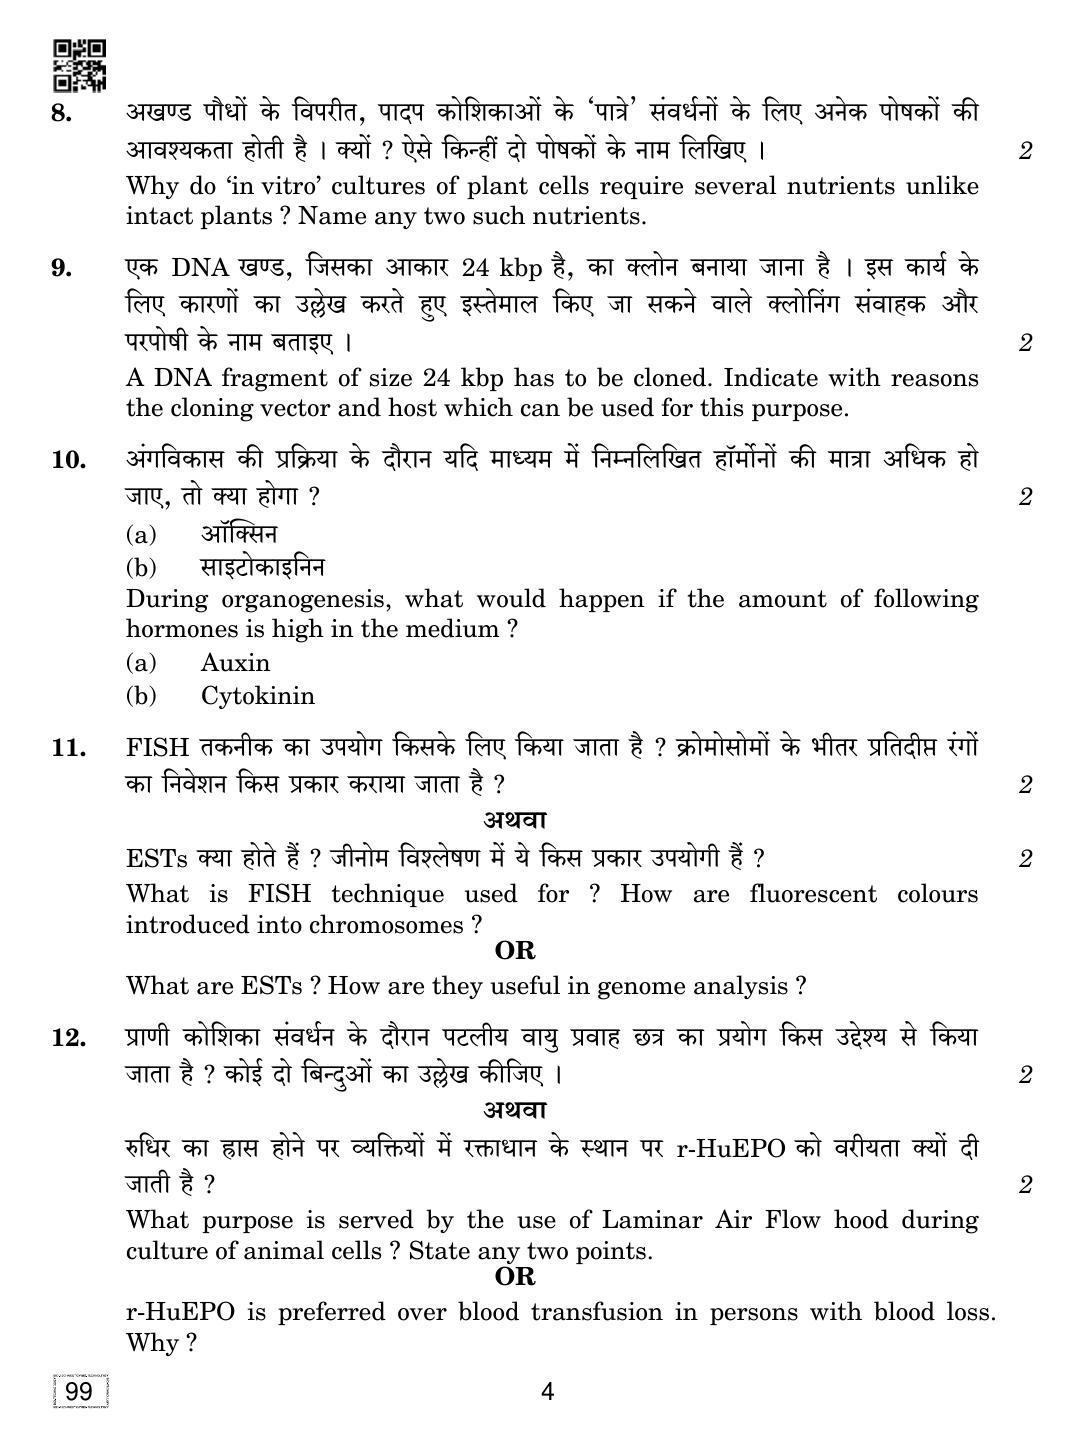 CBSE Class 12 99 BIOTECHNOLOGY 2019 Compartment Question Paper - Page 4